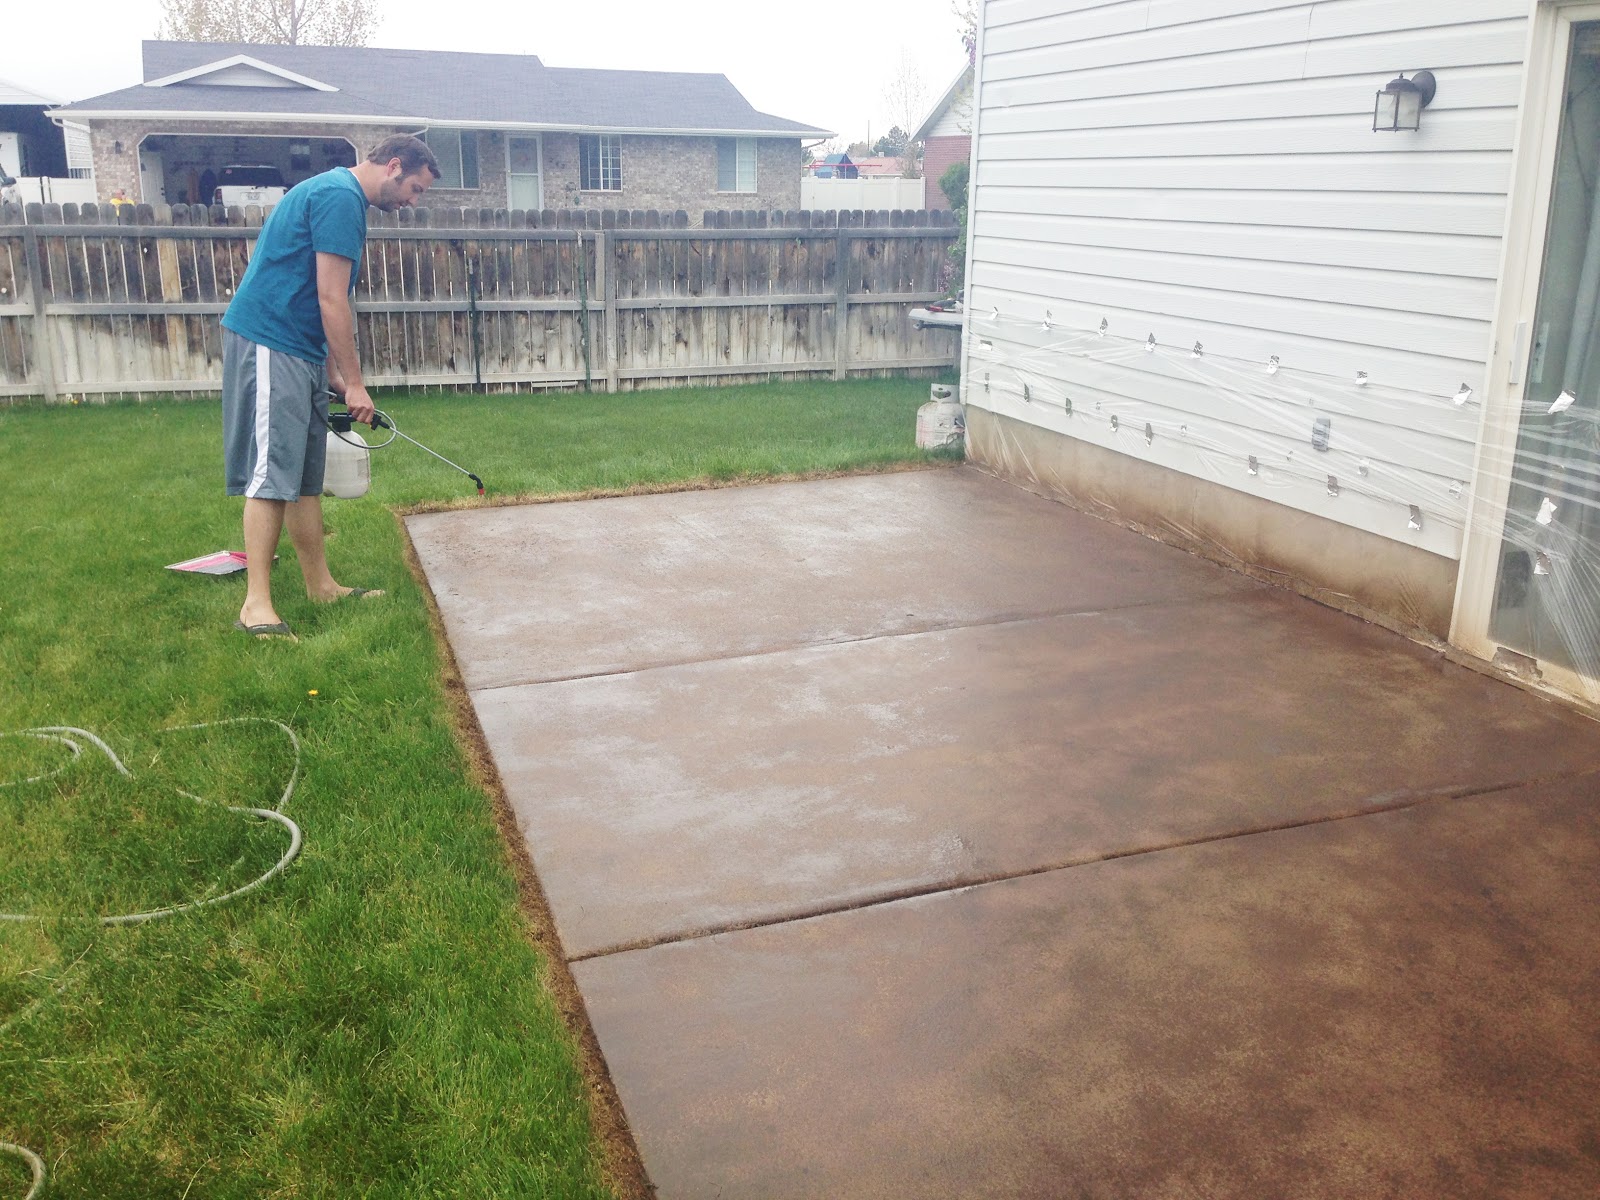 How To Stain A Concrete Patio Chris, Can You Stain Your Own Concrete Patio